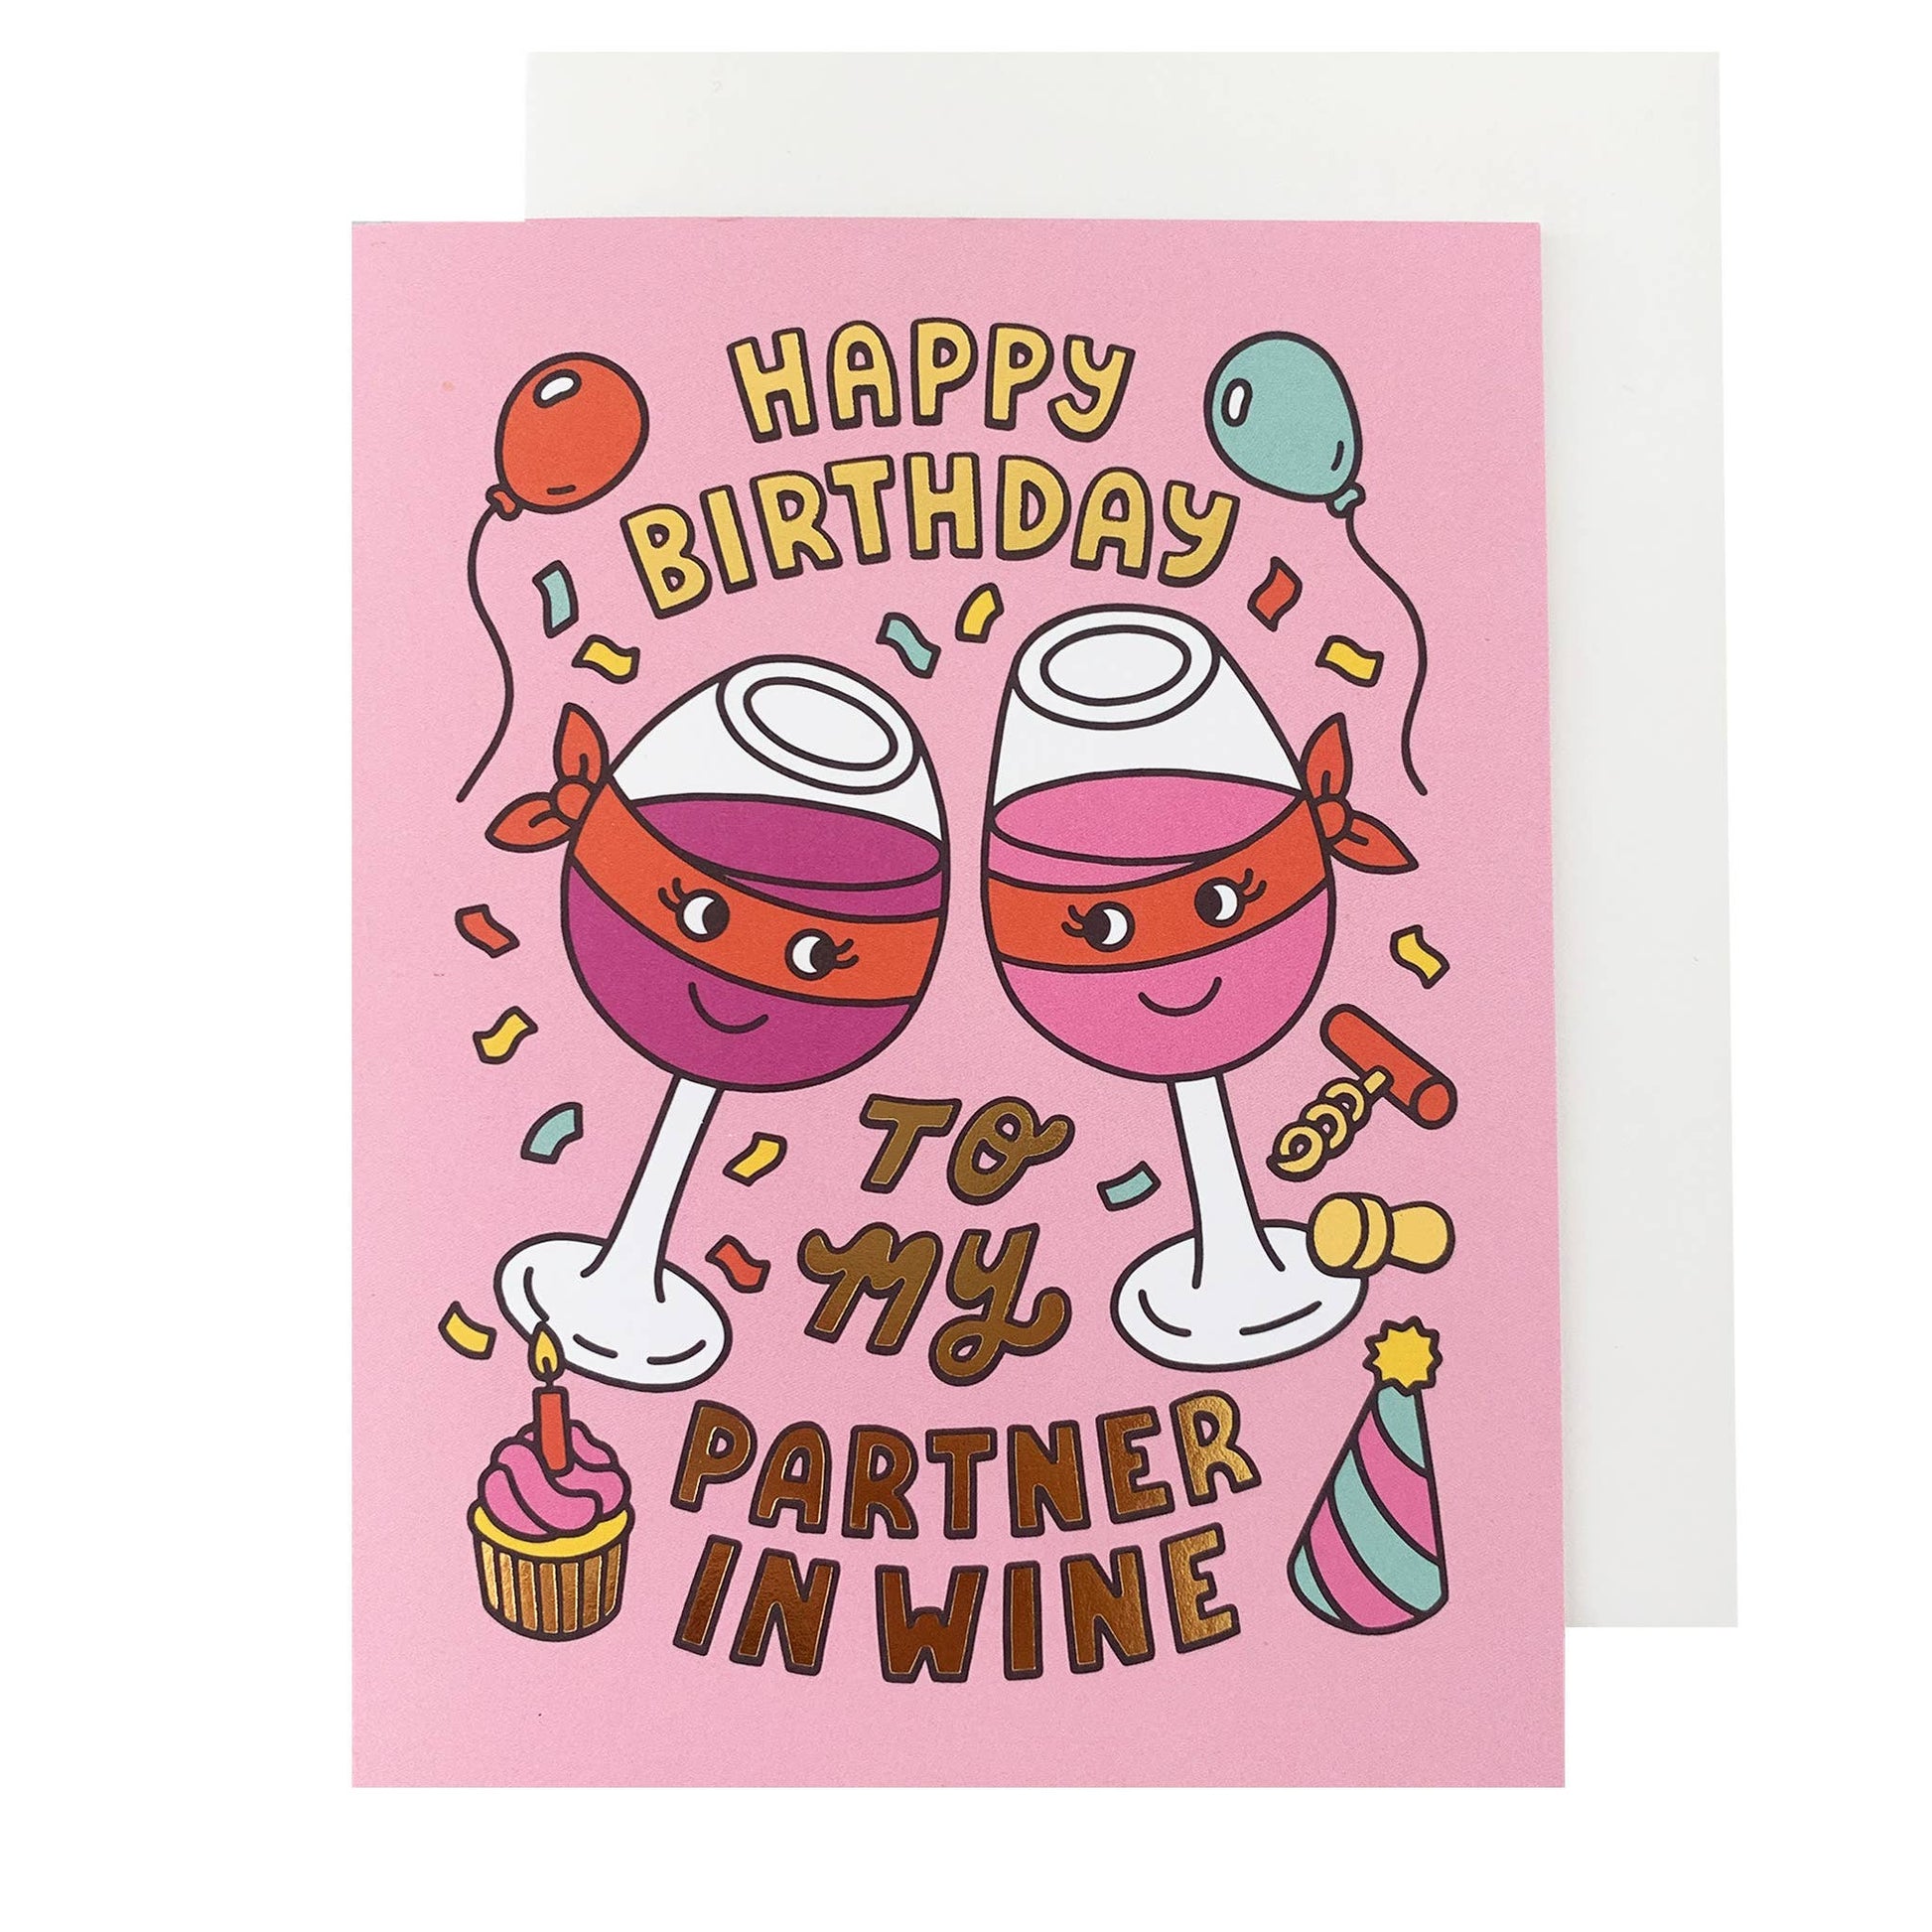 Partner in Wine birthday greeting card that reads "Happy Birthday to my Partner in Wine" 